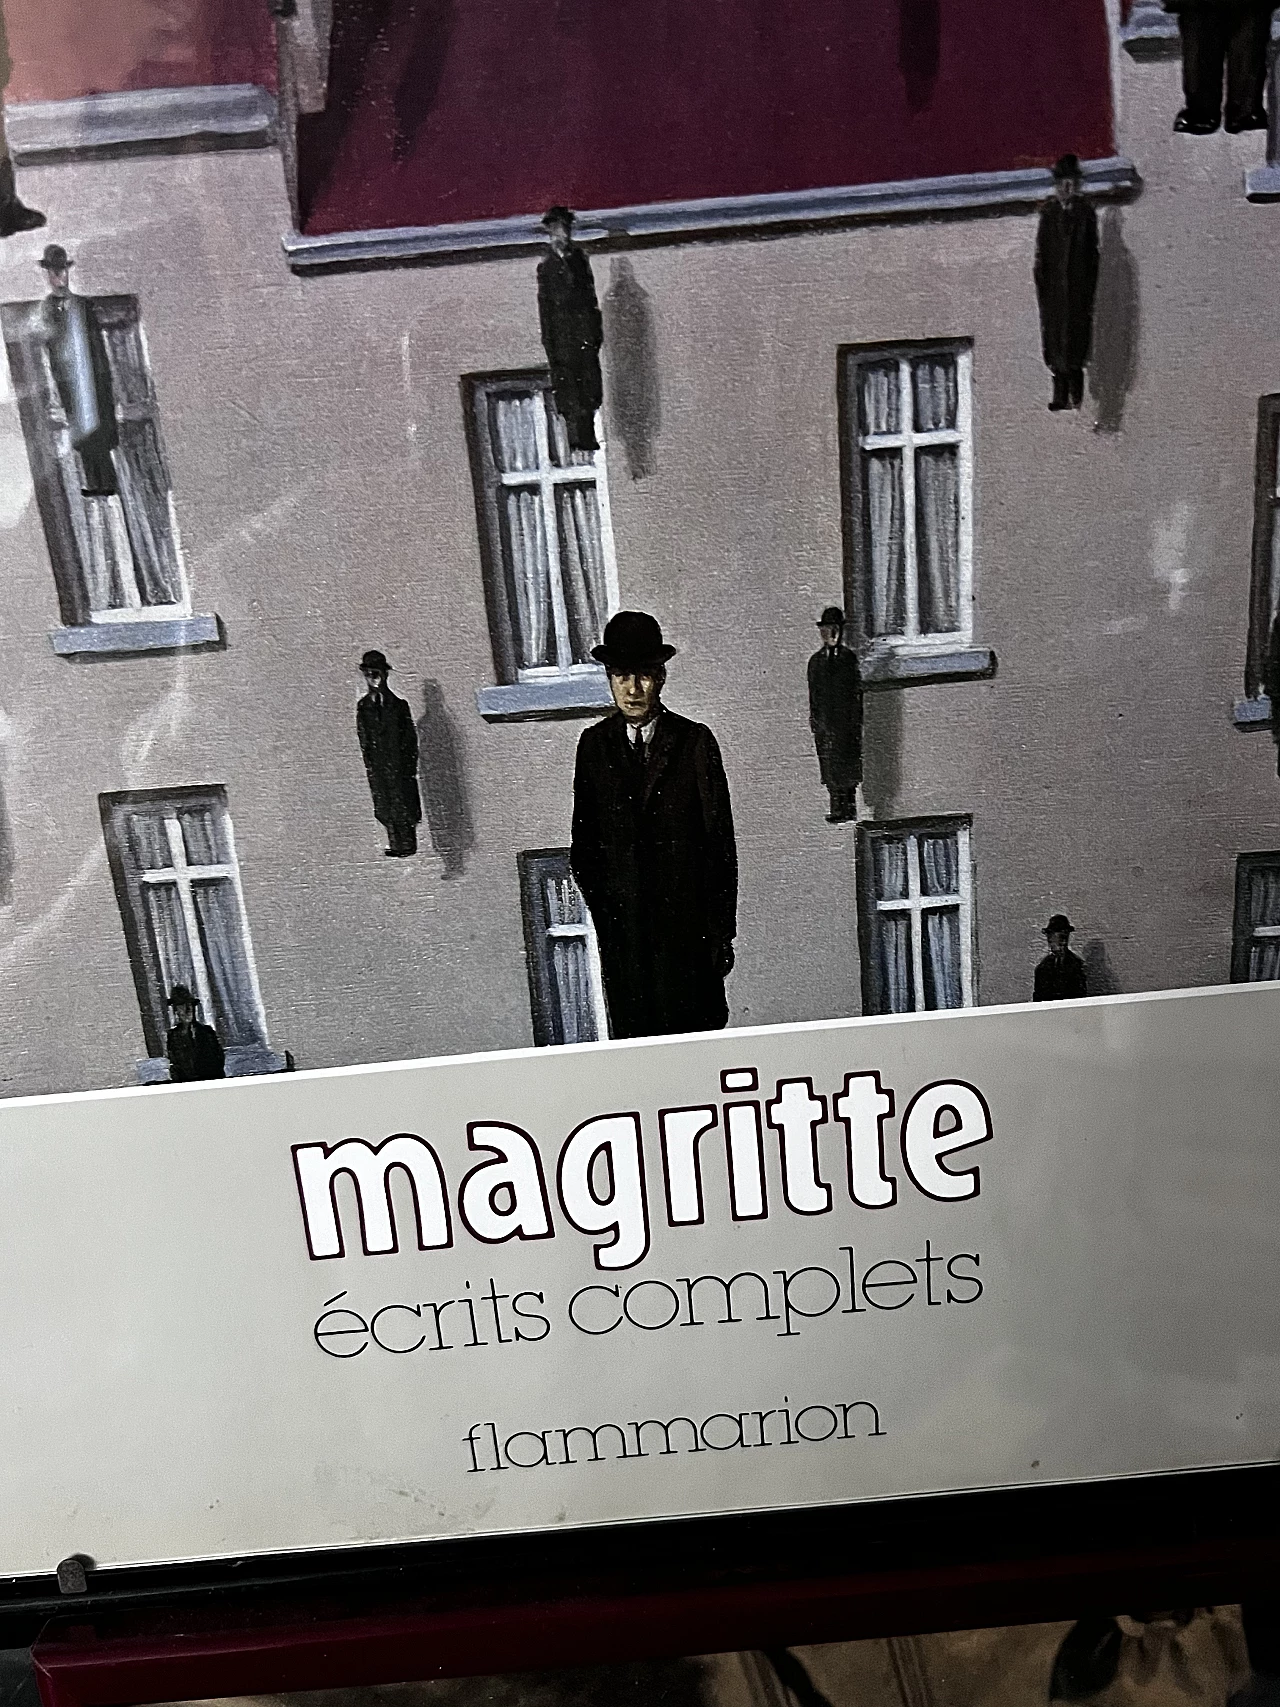 Poster for Magritte écrits complets book by Editions Flammarion, 1990s 3